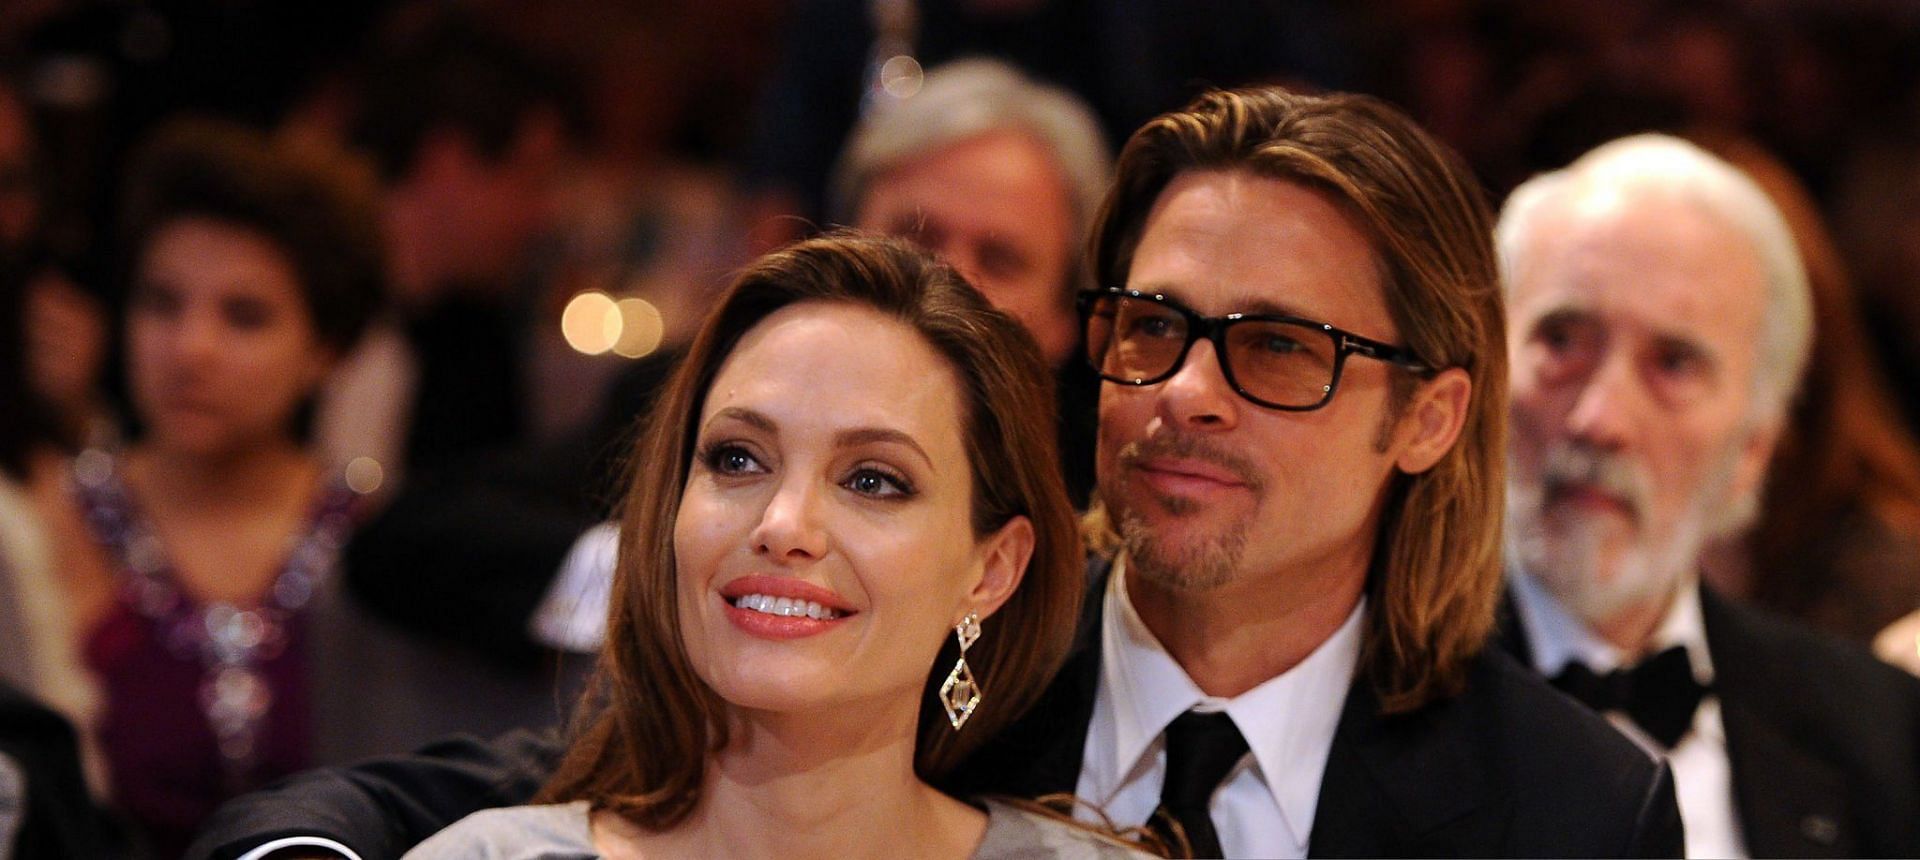 Angelina Jolie previously claimed that Brad Pitt assaulted her on a private plane (Image vie Getty Images)